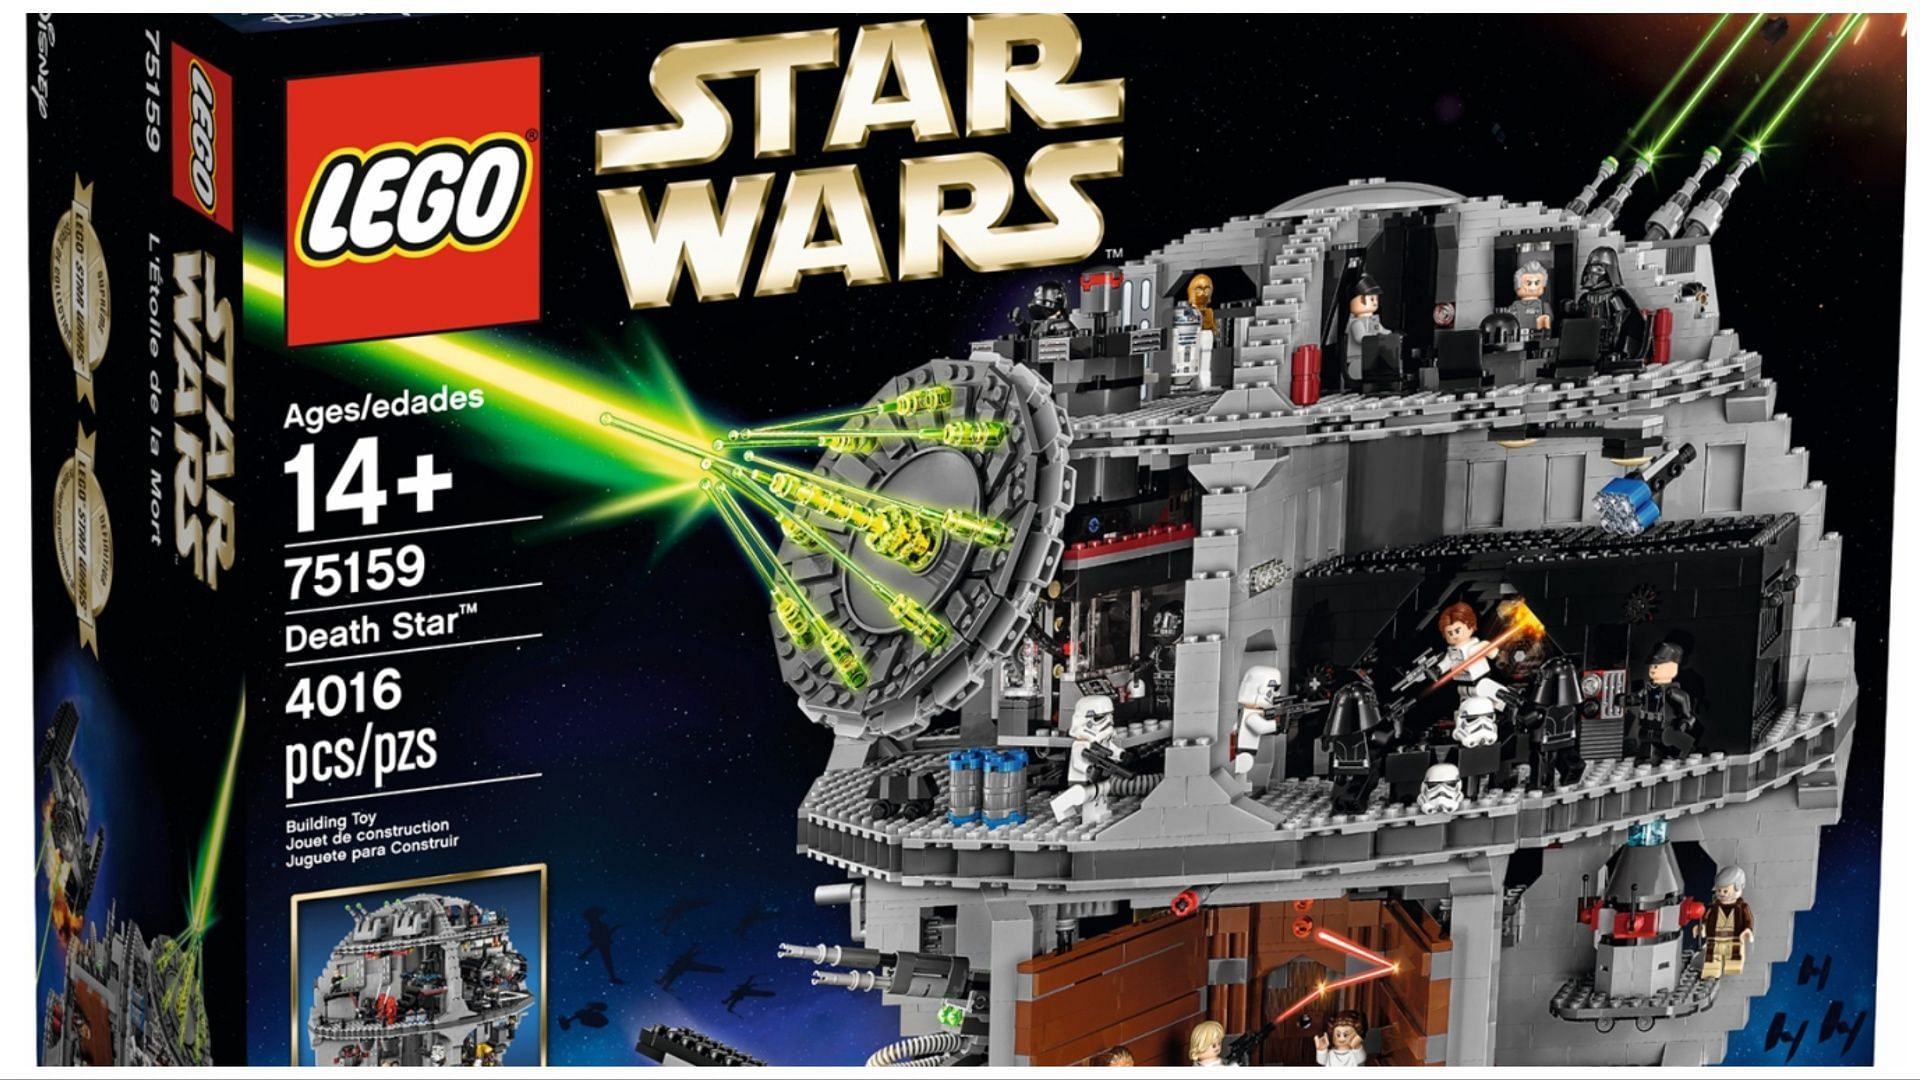 There are several other products as well (Image via LEGO)